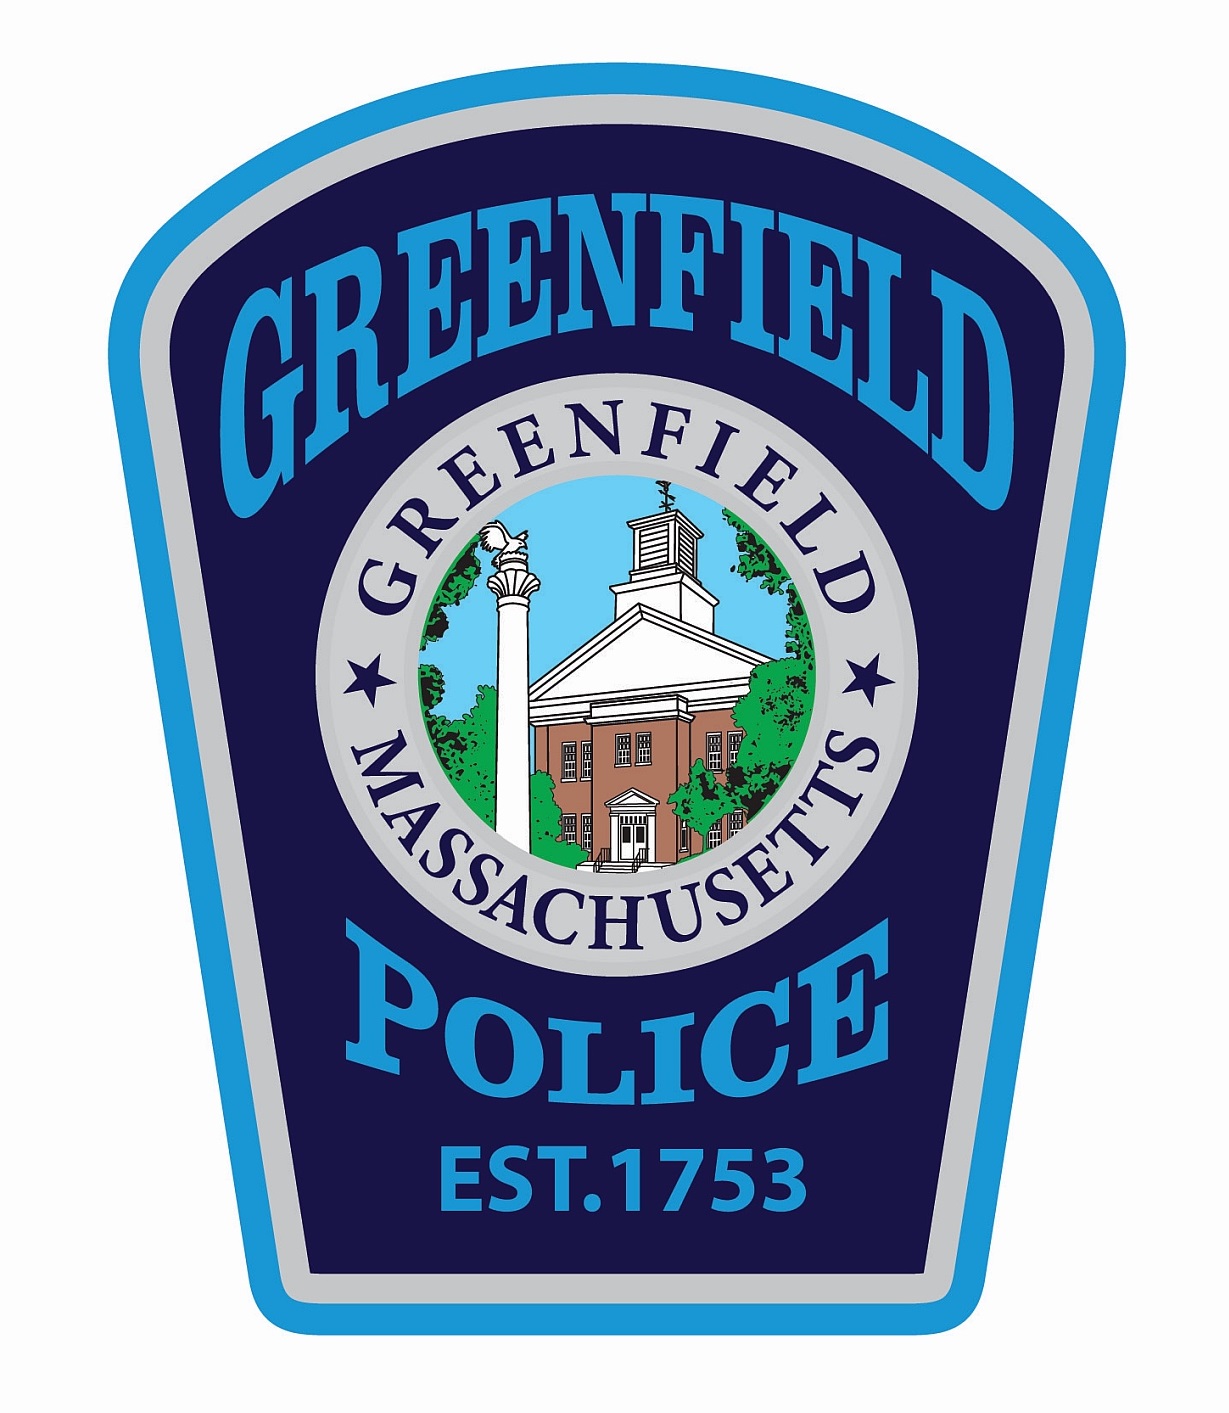 Greenfield Police Department, MA Public Safety Jobs